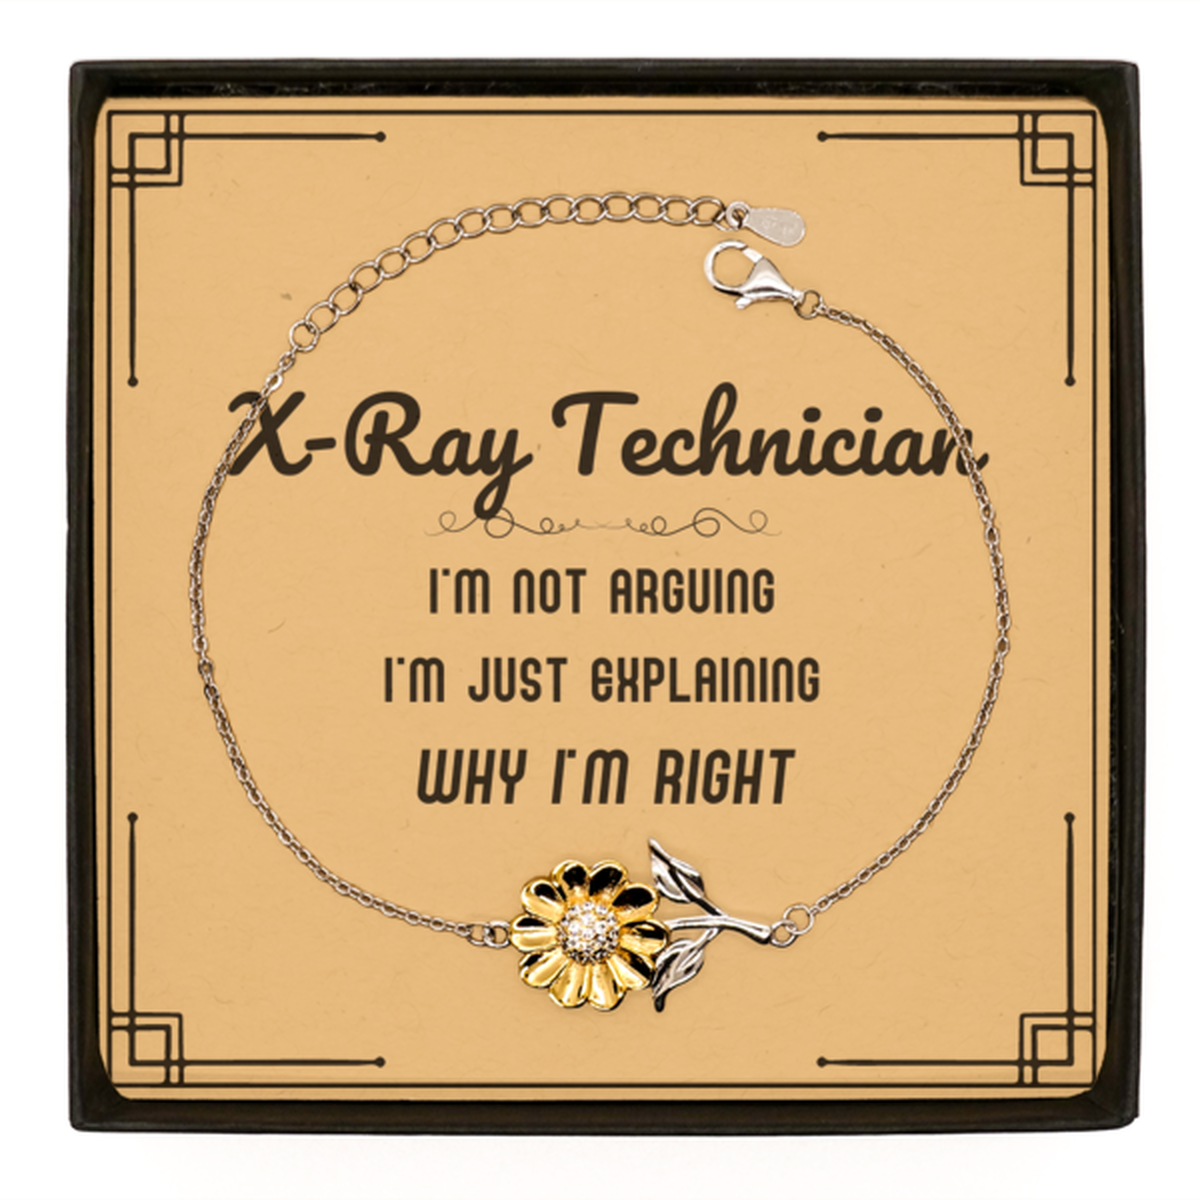 X-Ray Technician I'm not Arguing. I'm Just Explaining Why I'm RIGHT Sunflower Bracelet, Funny Saying Quote X-Ray Technician Gifts For X-Ray Technician Message Card Graduation Birthday Christmas Gifts for Men Women Coworker